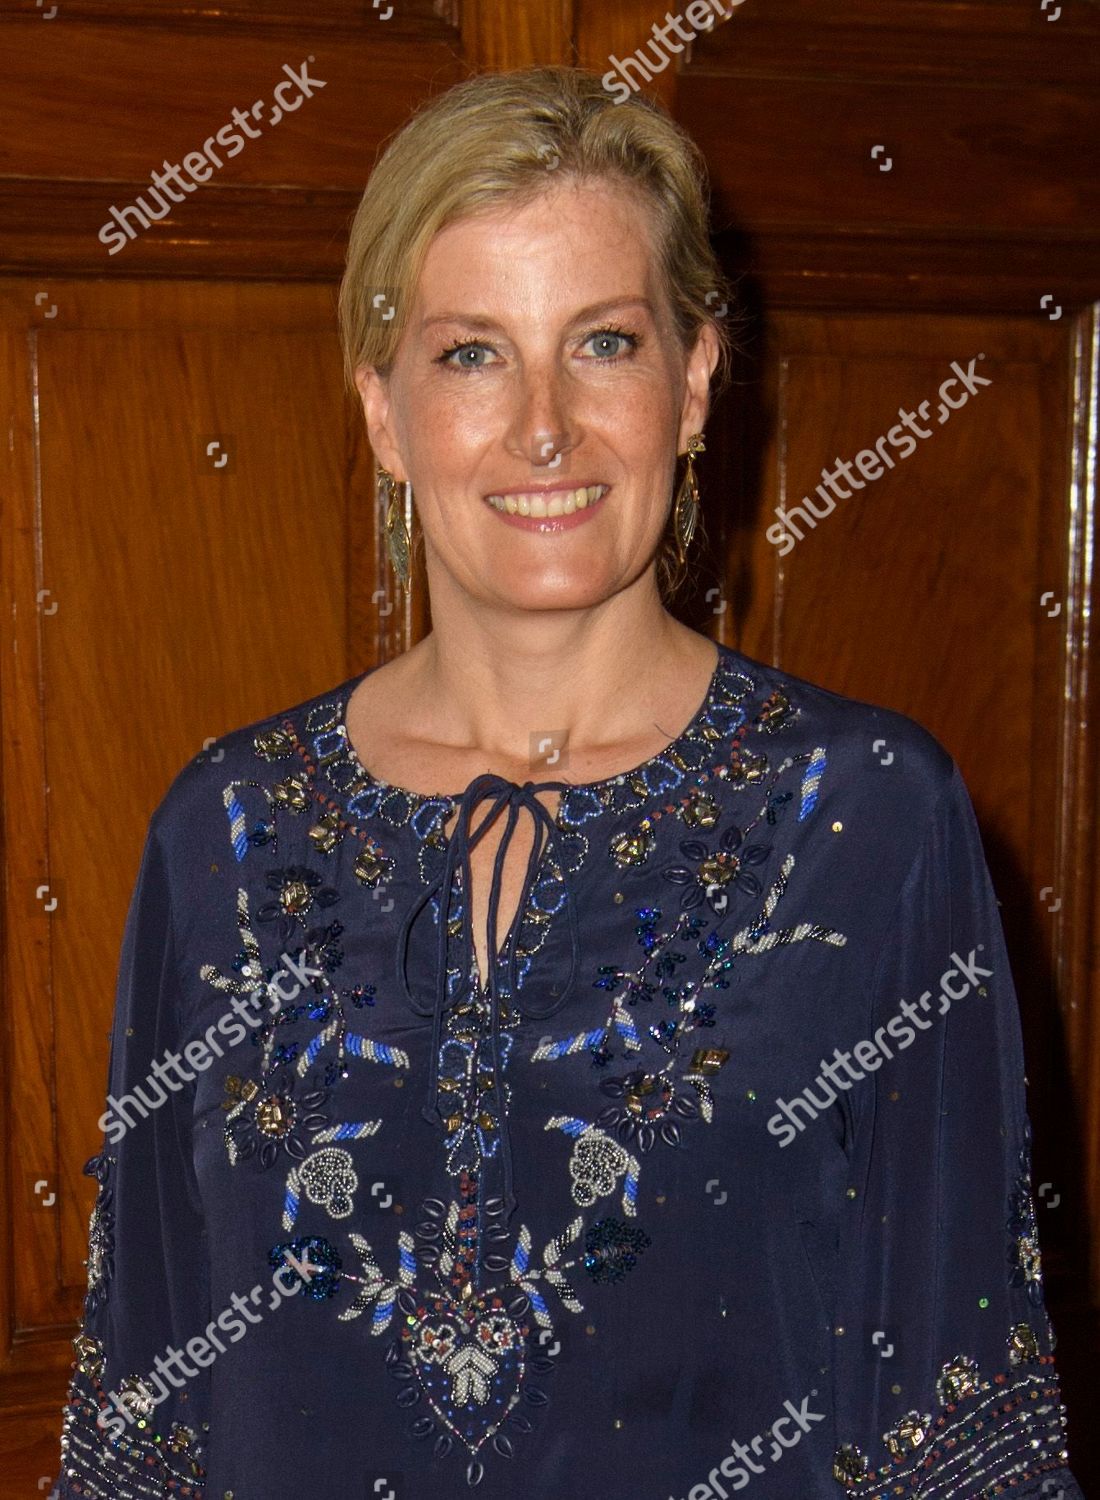 sophie-countess-of-wessex-visit-to-india-shutterstock-editorial-10227195dw.jpg